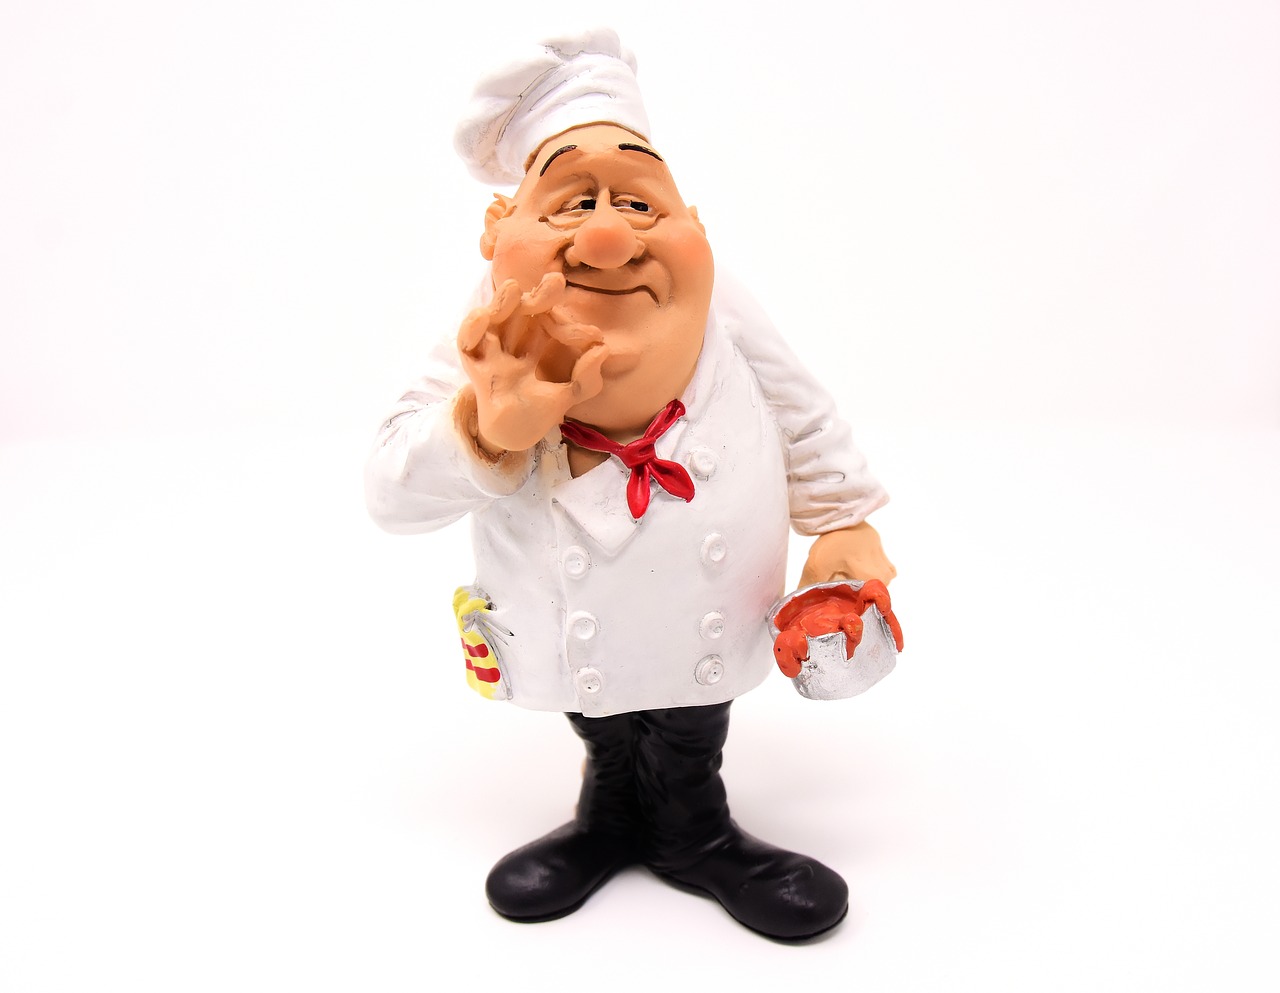 cooking figure chef's hat free photo